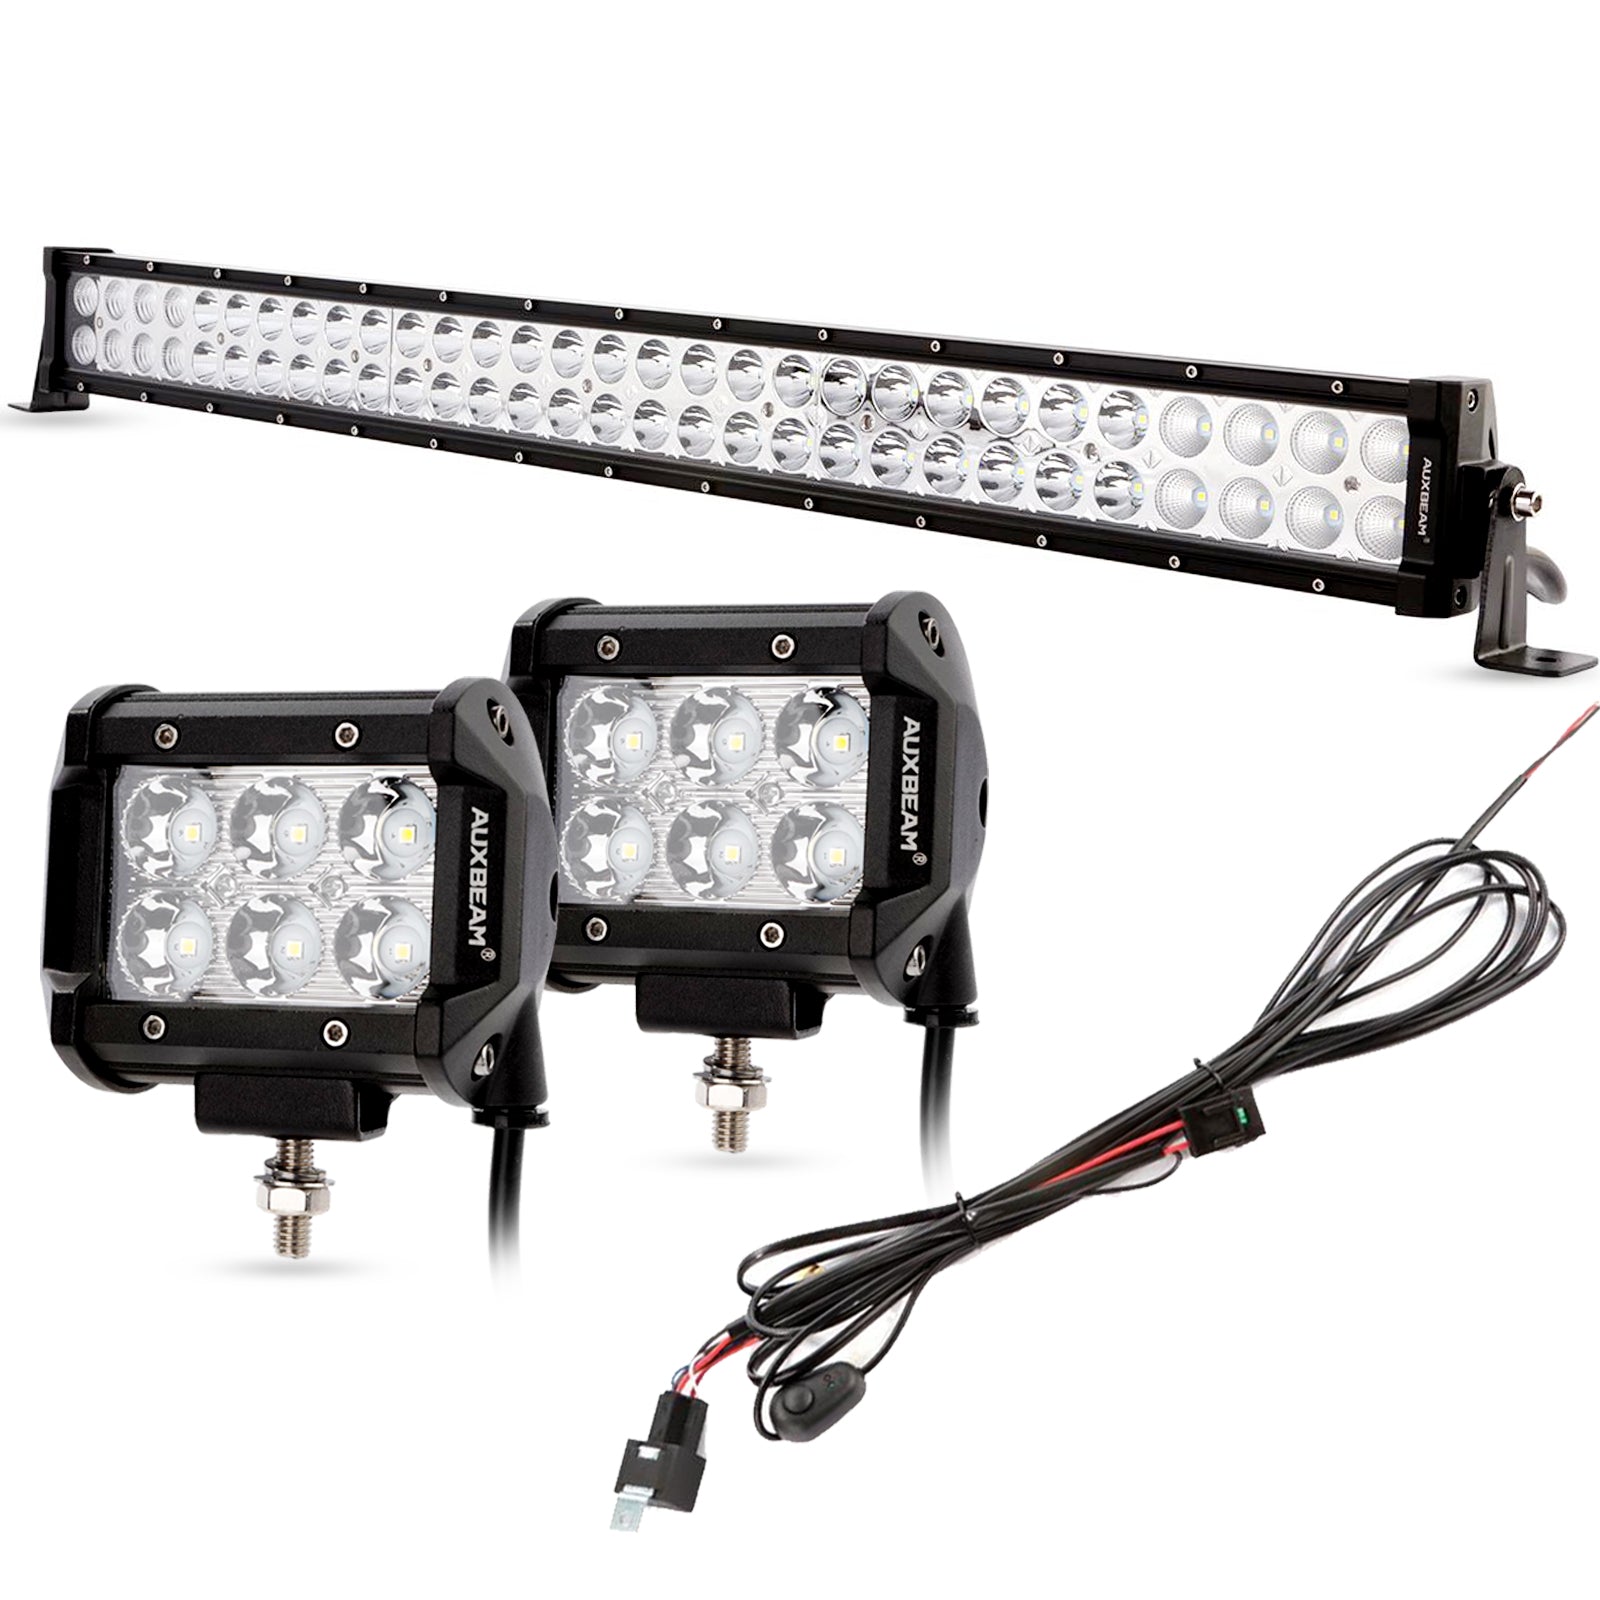 32"/42"/52"Dual Row Combo Light Bar&2pcs 4"Spot Driving Light&Wiring Harness Compatible for Jeep, Pickup, Truck, ATV, Boat, SUV